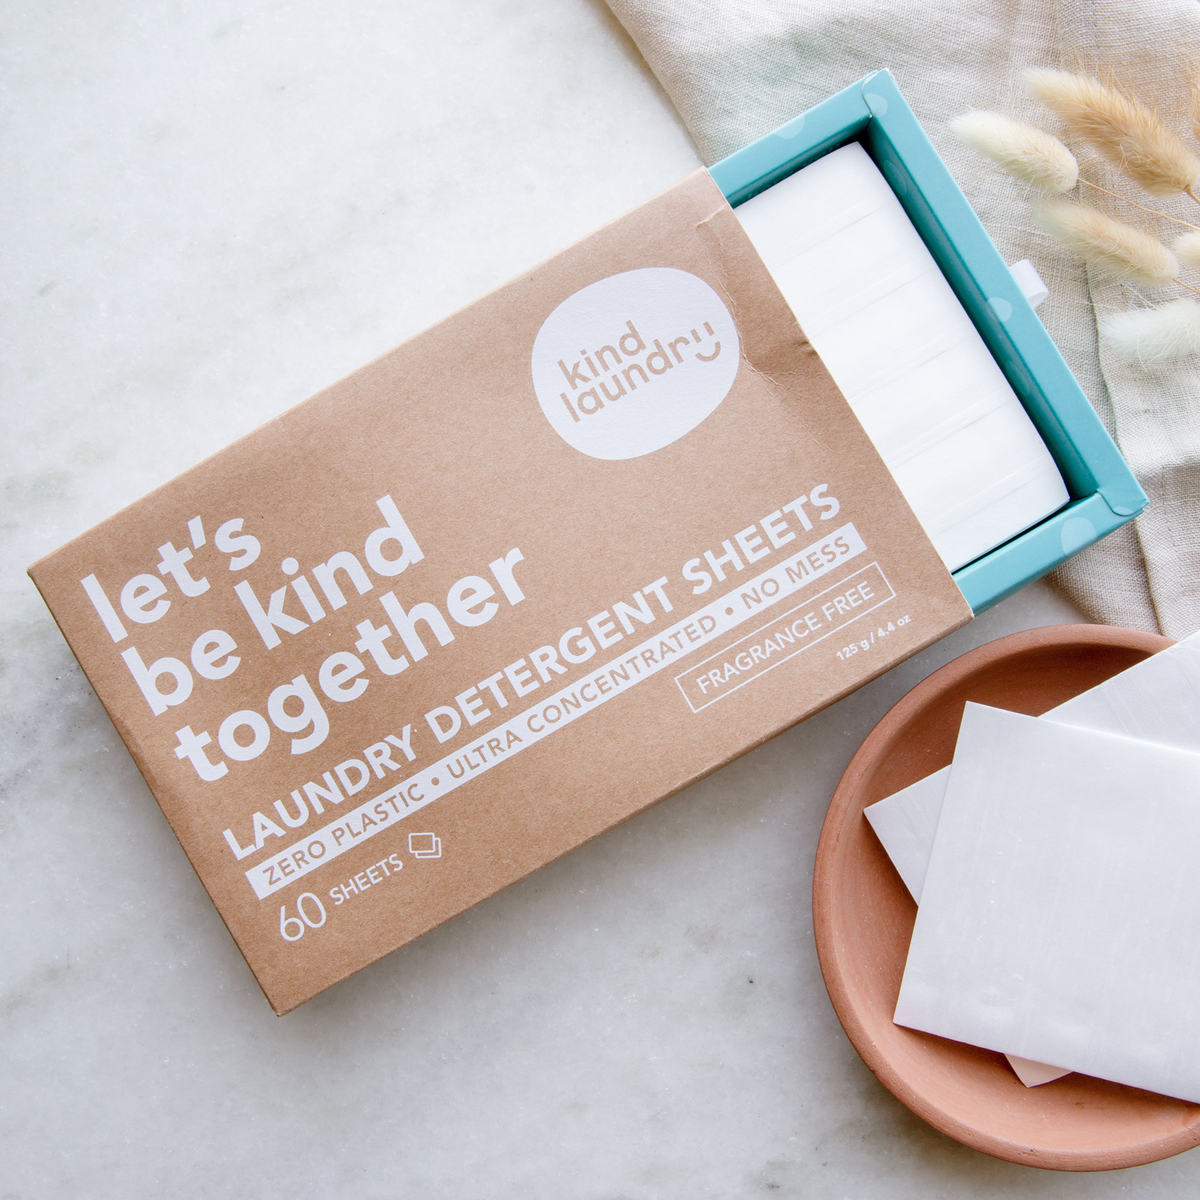 Cardboard box with blue insert pulled partially out and white sheets inside. 2 White sheets are outside box on clay plate. Box reads: let's be kind together laundry detergent sheets. Zero plastic ultra concentrated no mess.